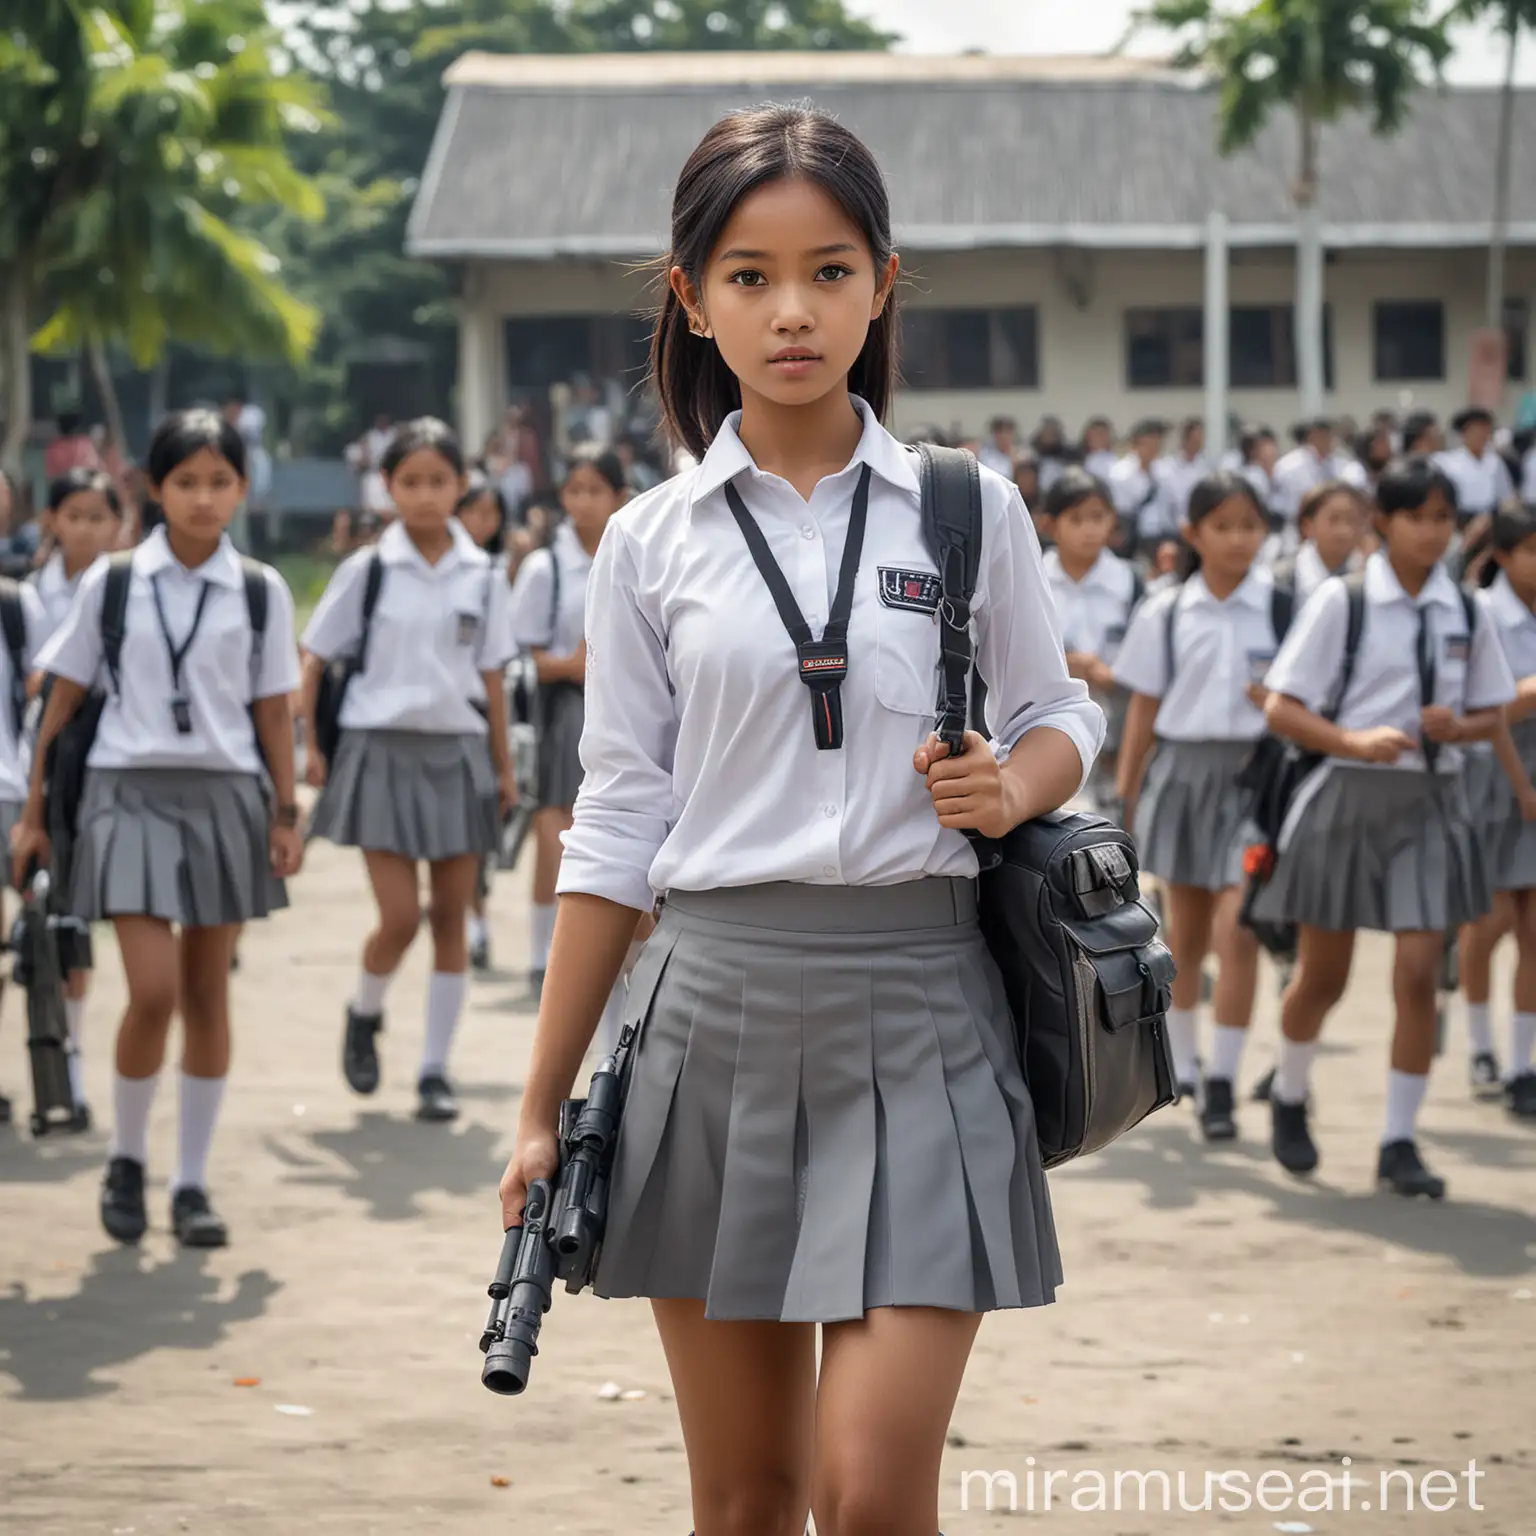 futuristic photo, beautiful Indonesian girl, wearing a white school uniform and gray mini skirt, carrying a school bag and carrying a bazooka in her right hand, in the school yard, several other students can be seen paying attention, detailed, realistic.